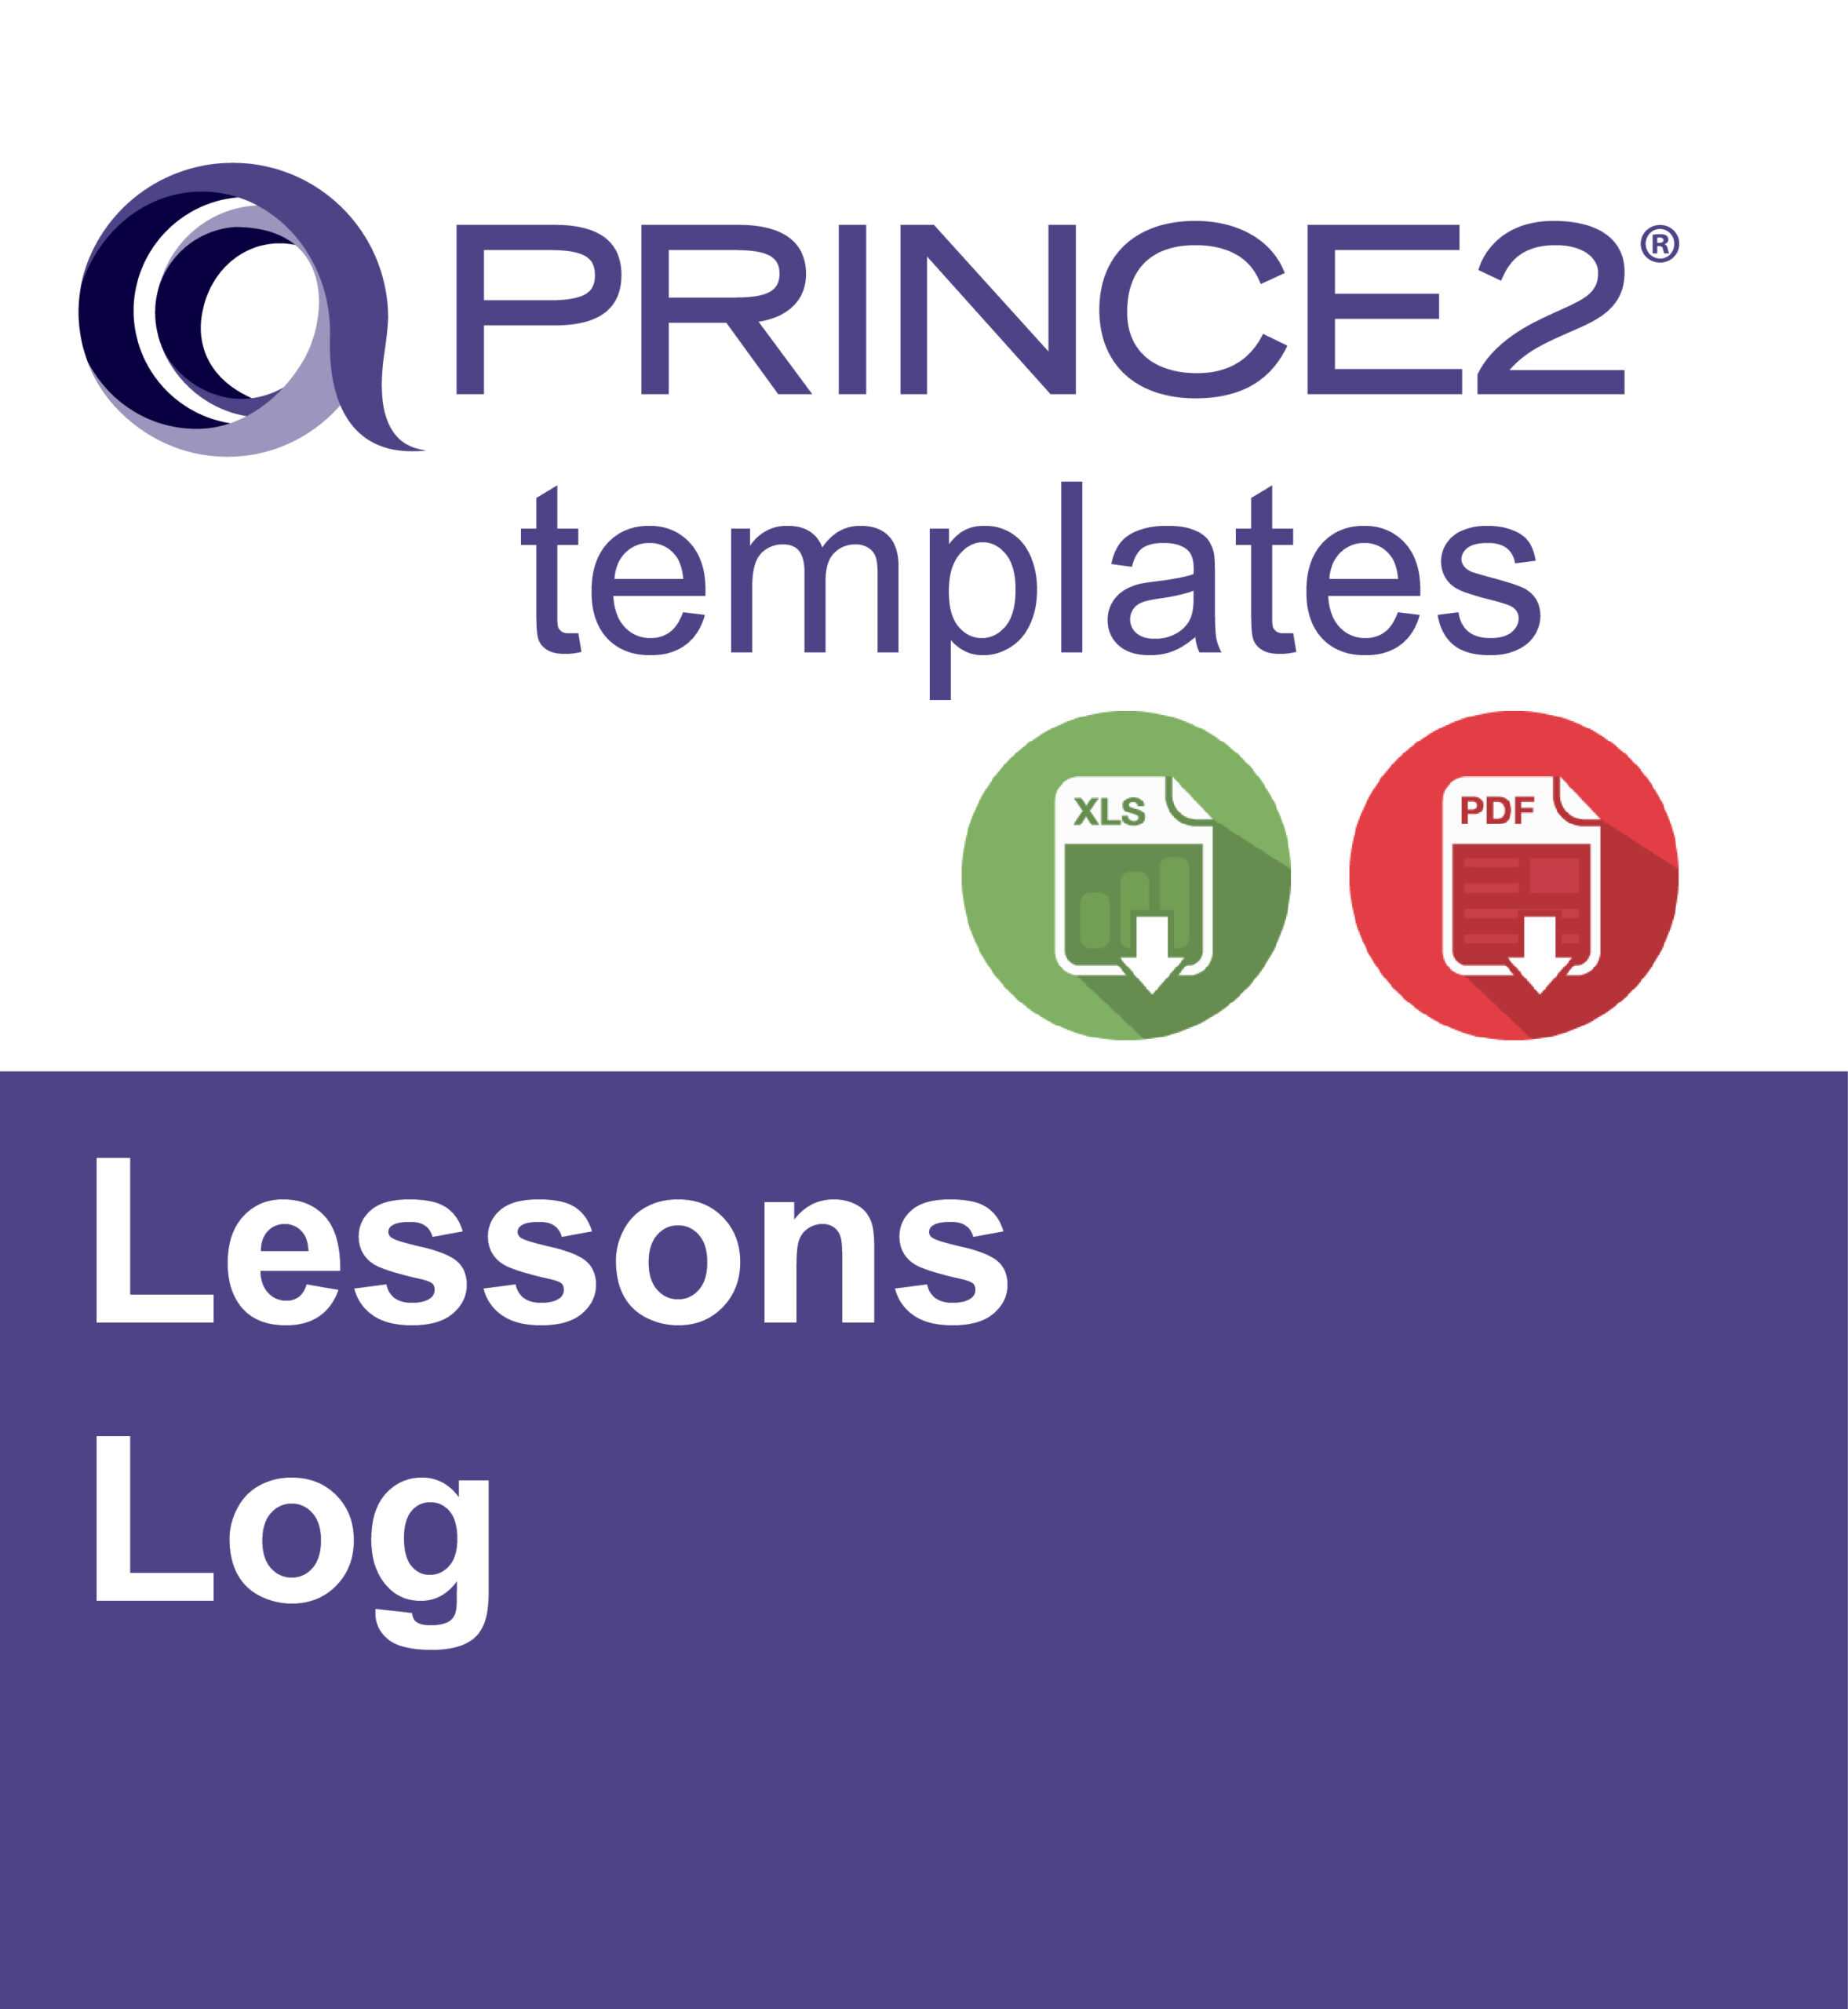 Prince2 Lessons Log With Prince2 Lessons Learned Report Template